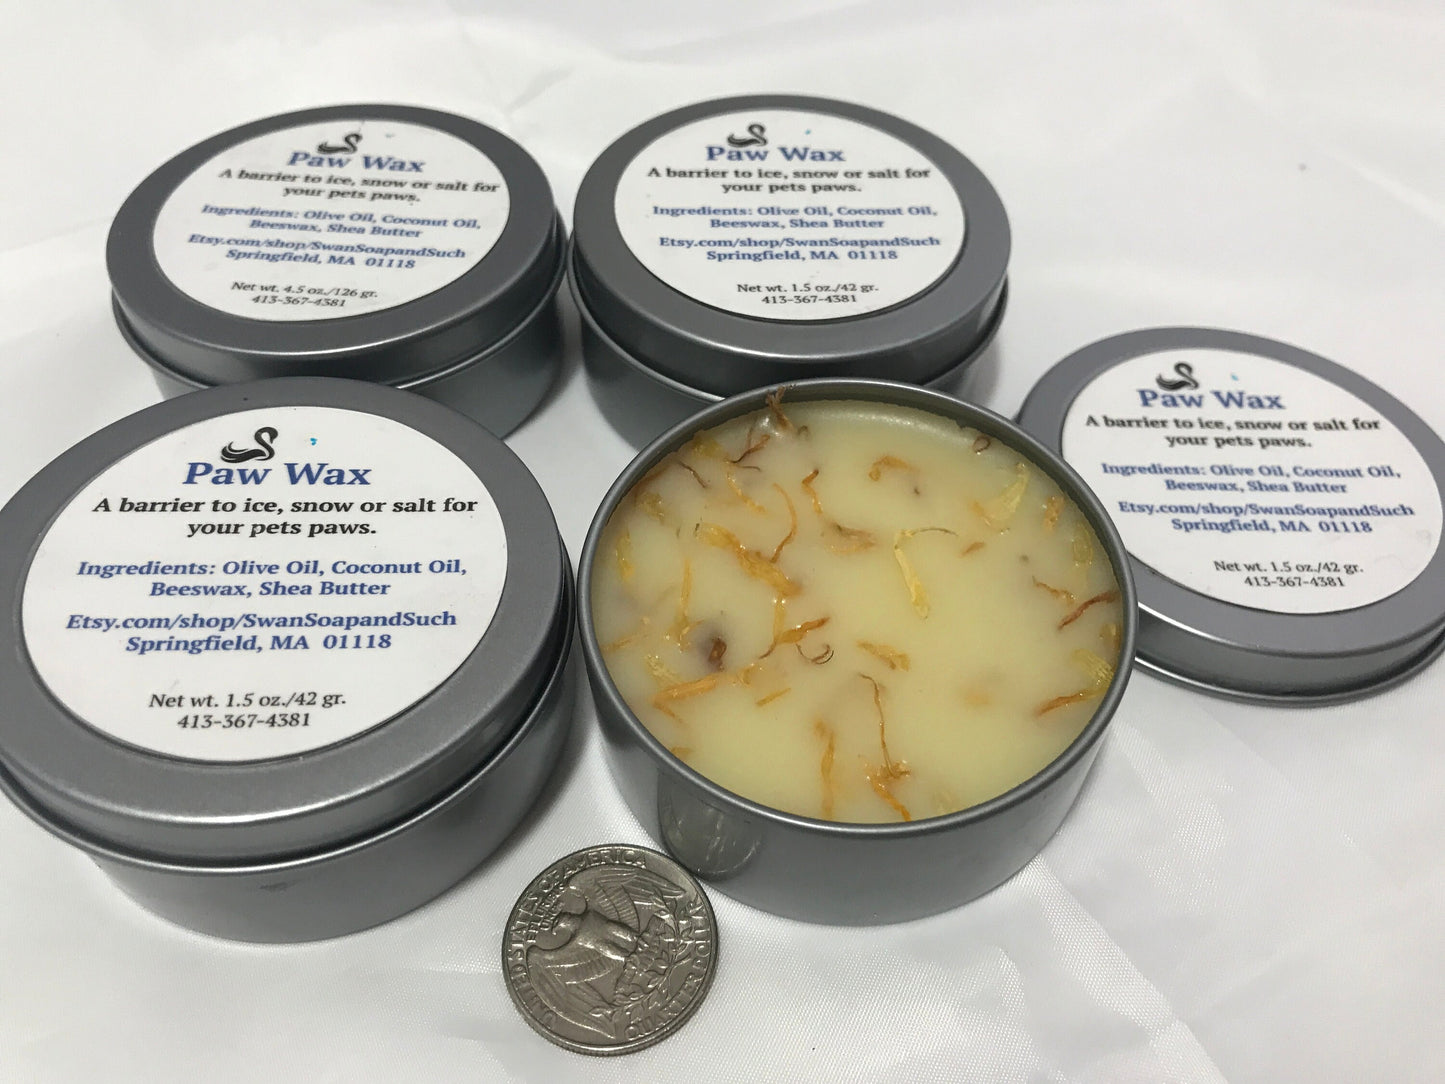 Paw Wax Paw Balm for Dogs and Cats 1.5 oz. with Calendula Flower Petals, natural paw balm, moisturizing paw balm